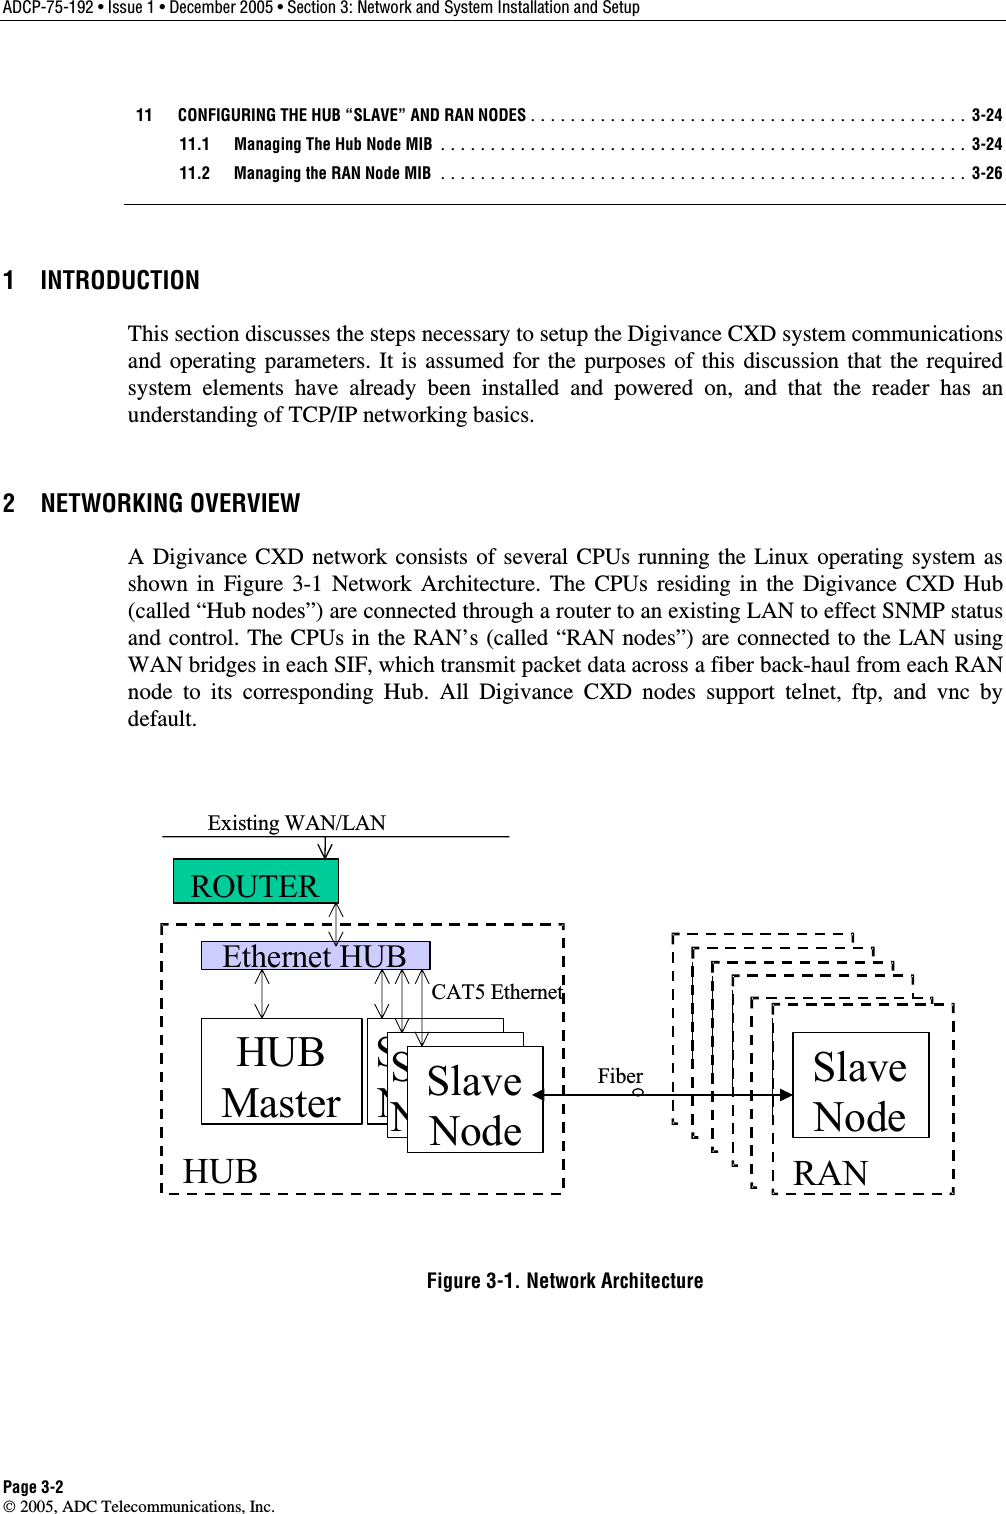 ADCP-75-192 • Issue 1 • December 2005 • Section 3: Network and System Installation and Setup Page 3-2  2005, ADC Telecommunications, Inc.   11  CONFIGURING THE HUB “SLAVE” AND RAN NODES............................................ 3-24   11.1  Managing The Hub Node MIB ..................................................... 3-24   11.2  Managing the RAN Node MIB ..................................................... 3-26 1 INTRODUCTION This section discusses the steps necessary to setup the Digivance CXD system communications and operating parameters. It is assumed for the purposes of this discussion that the required system elements have already been installed and powered on, and that the reader has an understanding of TCP/IP networking basics. 2 NETWORKING OVERVIEW A Digivance CXD network consists of several CPUs running the Linux operating system as shown in Figure 3-1 Network Architecture. The CPUs residing in the Digivance CXD Hub (called “Hub nodes”) are connected through a router to an existing LAN to effect SNMP status and control. The CPUs in the RAN’s (called “RAN nodes”) are connected to the LAN using WAN bridges in each SIF, which transmit packet data across a fiber back-haul from each RAN node to its corresponding Hub. All Digivance CXD nodes support telnet, ftp, and vnc by default.   Ethernet HUBHUBMasterSlaveNodeHUBSlaveNodeSlaveNode RASlaveNodeRANSlaveNodeRANSlaveNodeRANSlaveNodeRANFiberCAT5 EthernetROUTERSlaveNodeRANSlaveNodeExisting WAN/LAN Figure 3-1. Network Architecture 